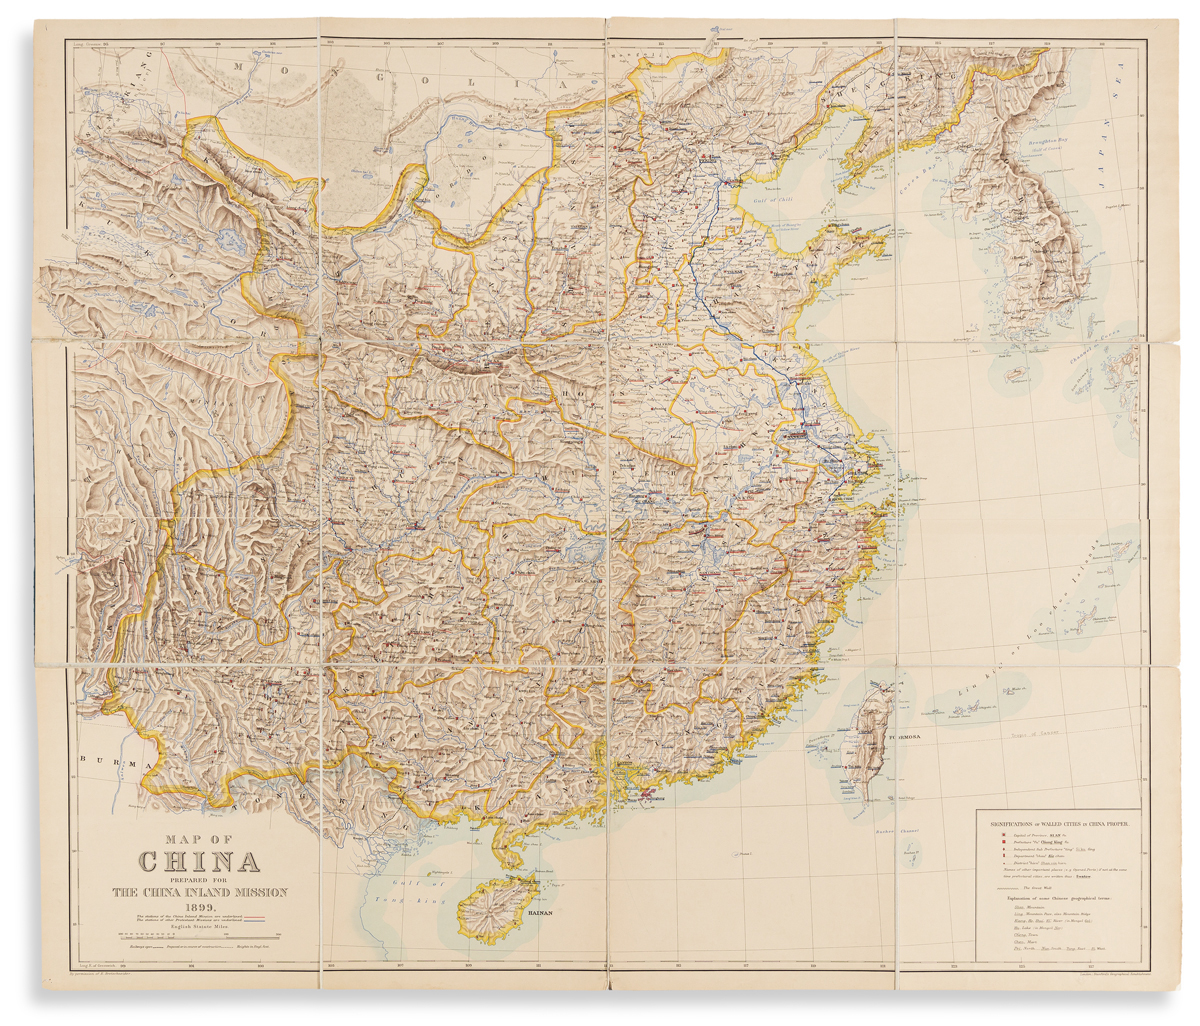 (CHINA.) Emil Bretschneider; and Edward Stanford. Map of China Prepared for the China Inland Mission.